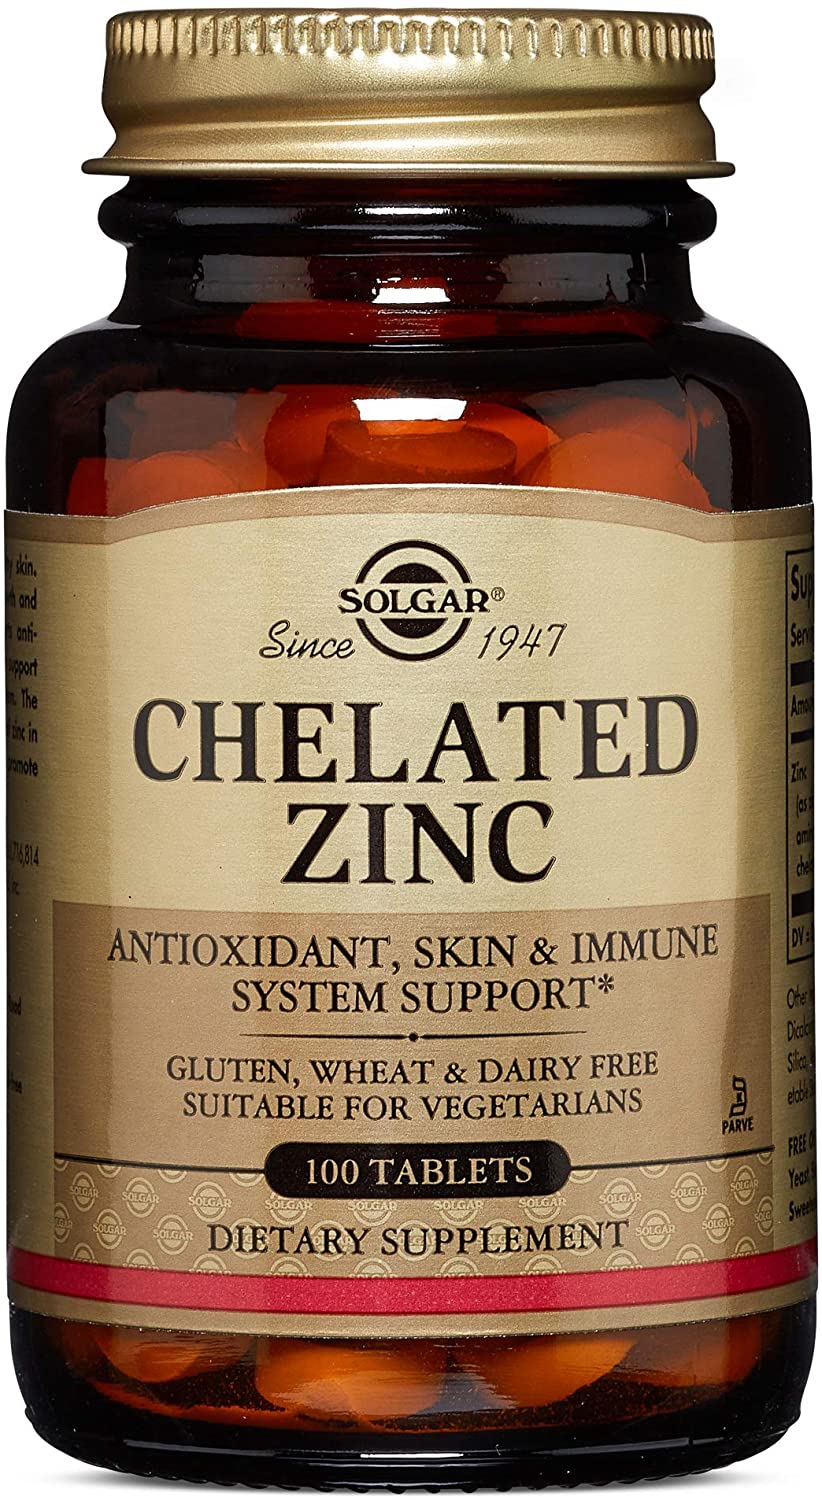 CHELATED ZINC TABLETS